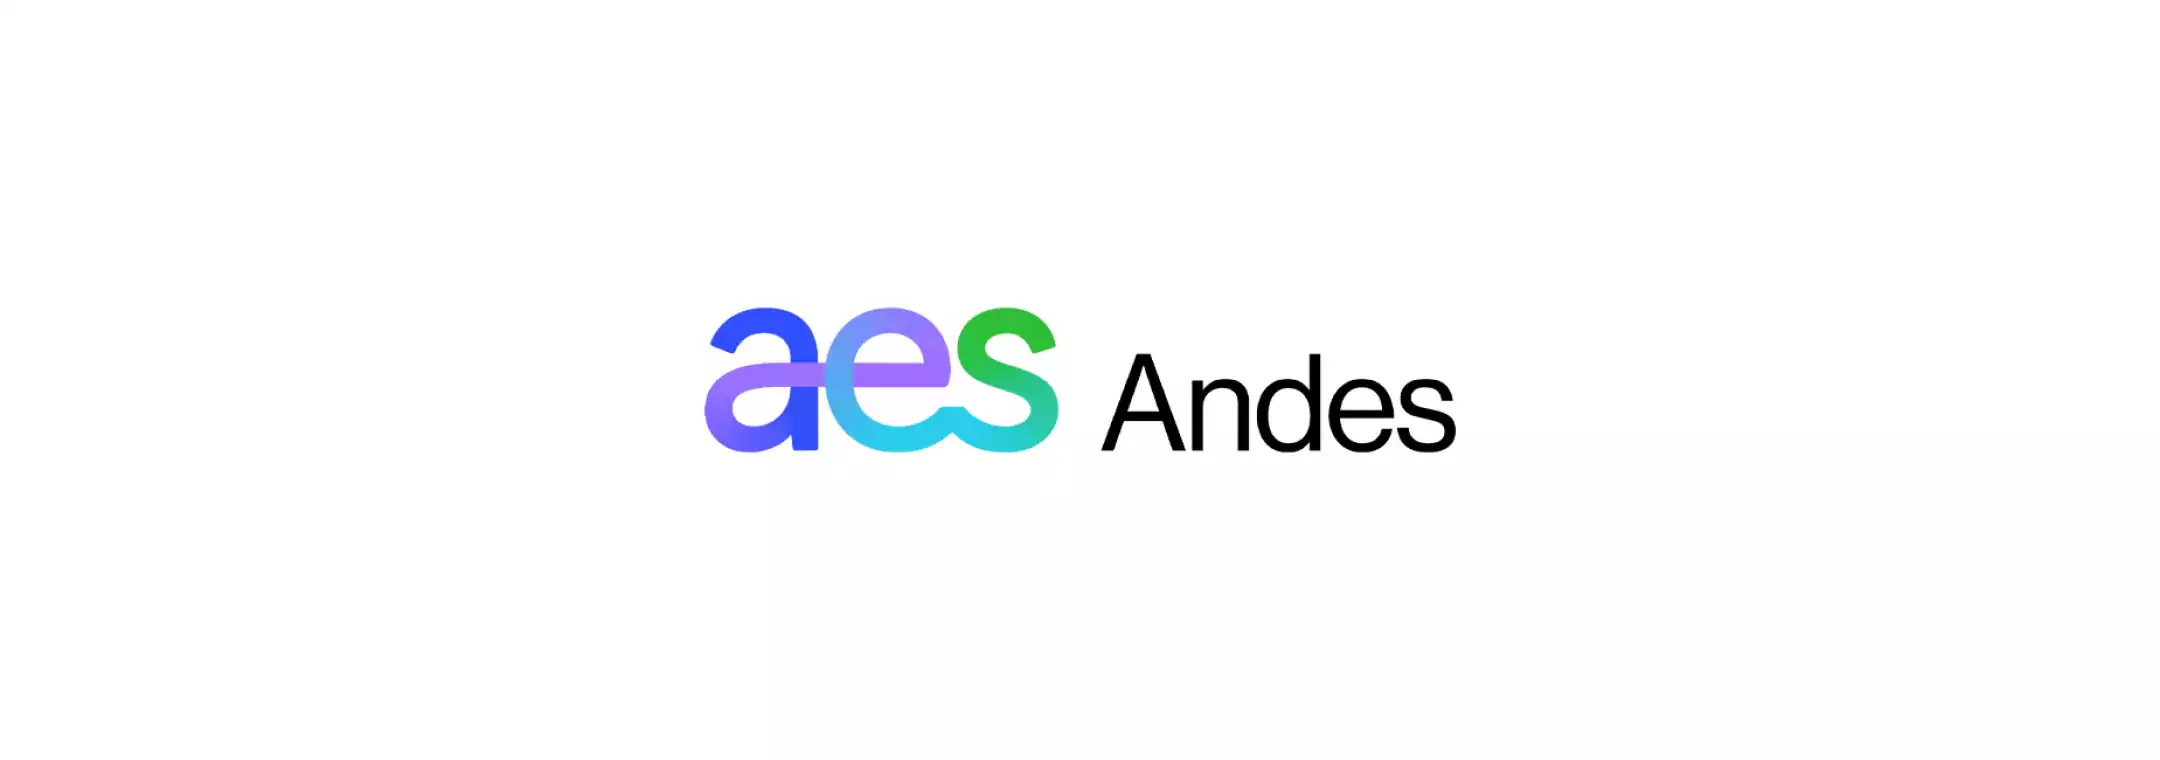 AES 1